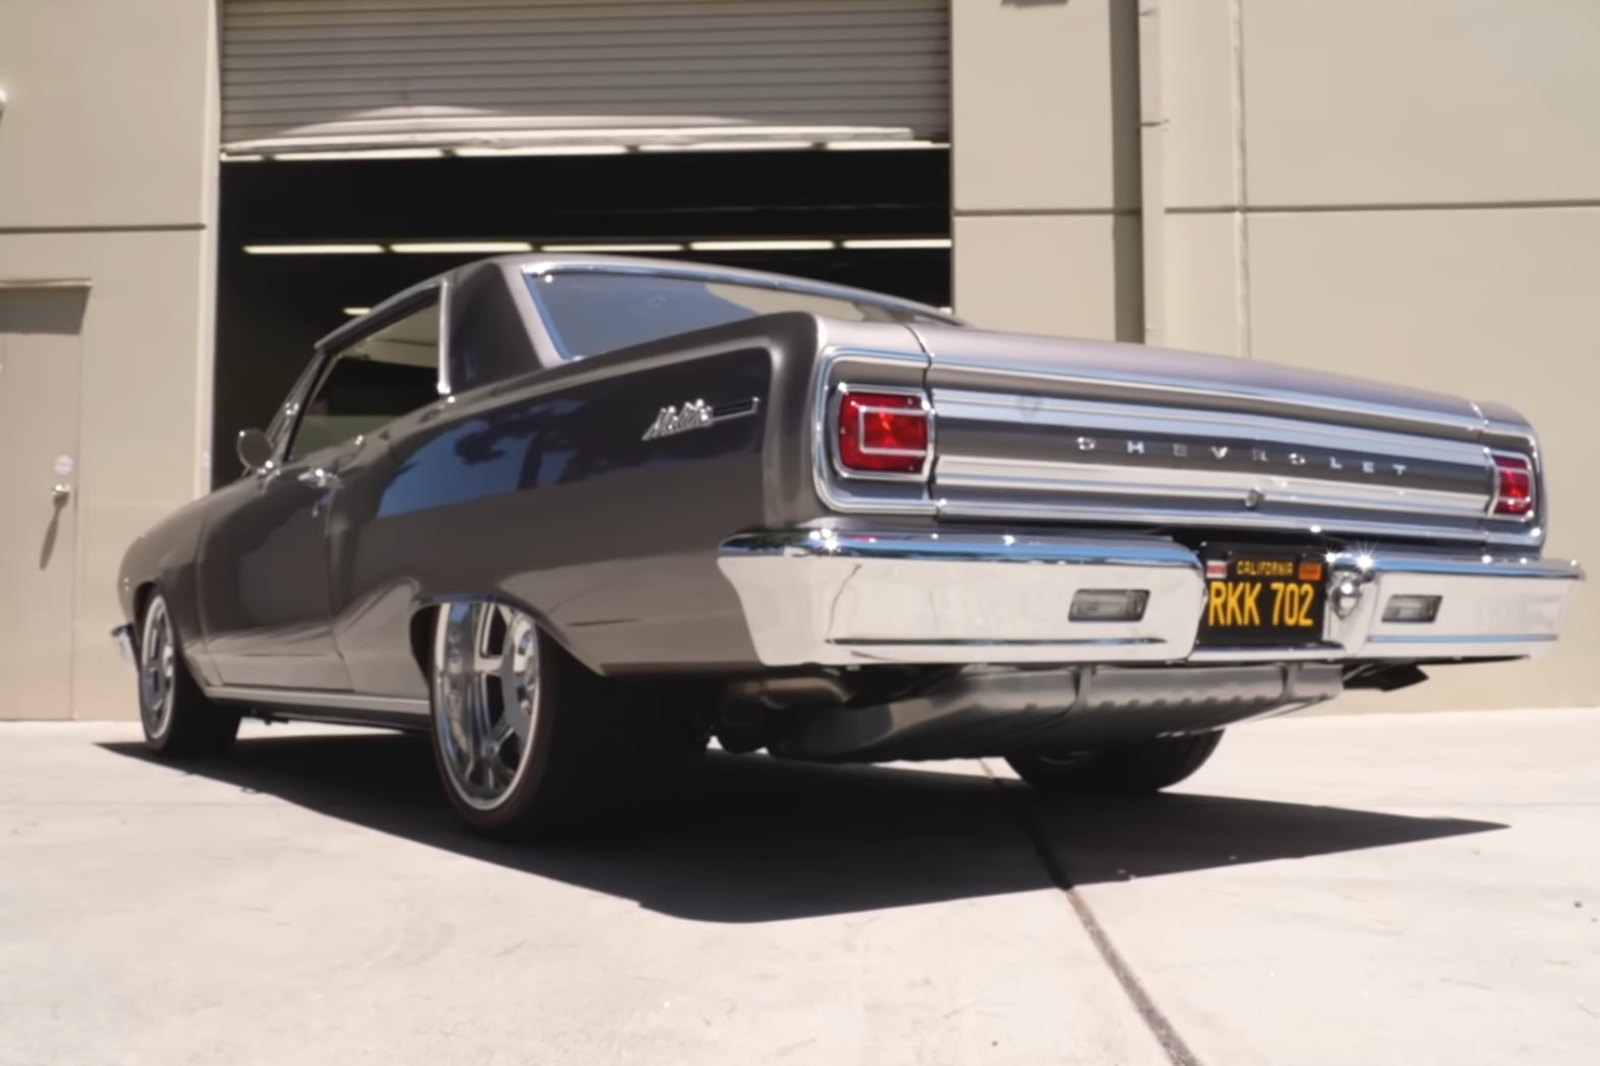 video, tuning, muscle cars, garage-built chevy chevelle is a clean restomod worthy of your attention